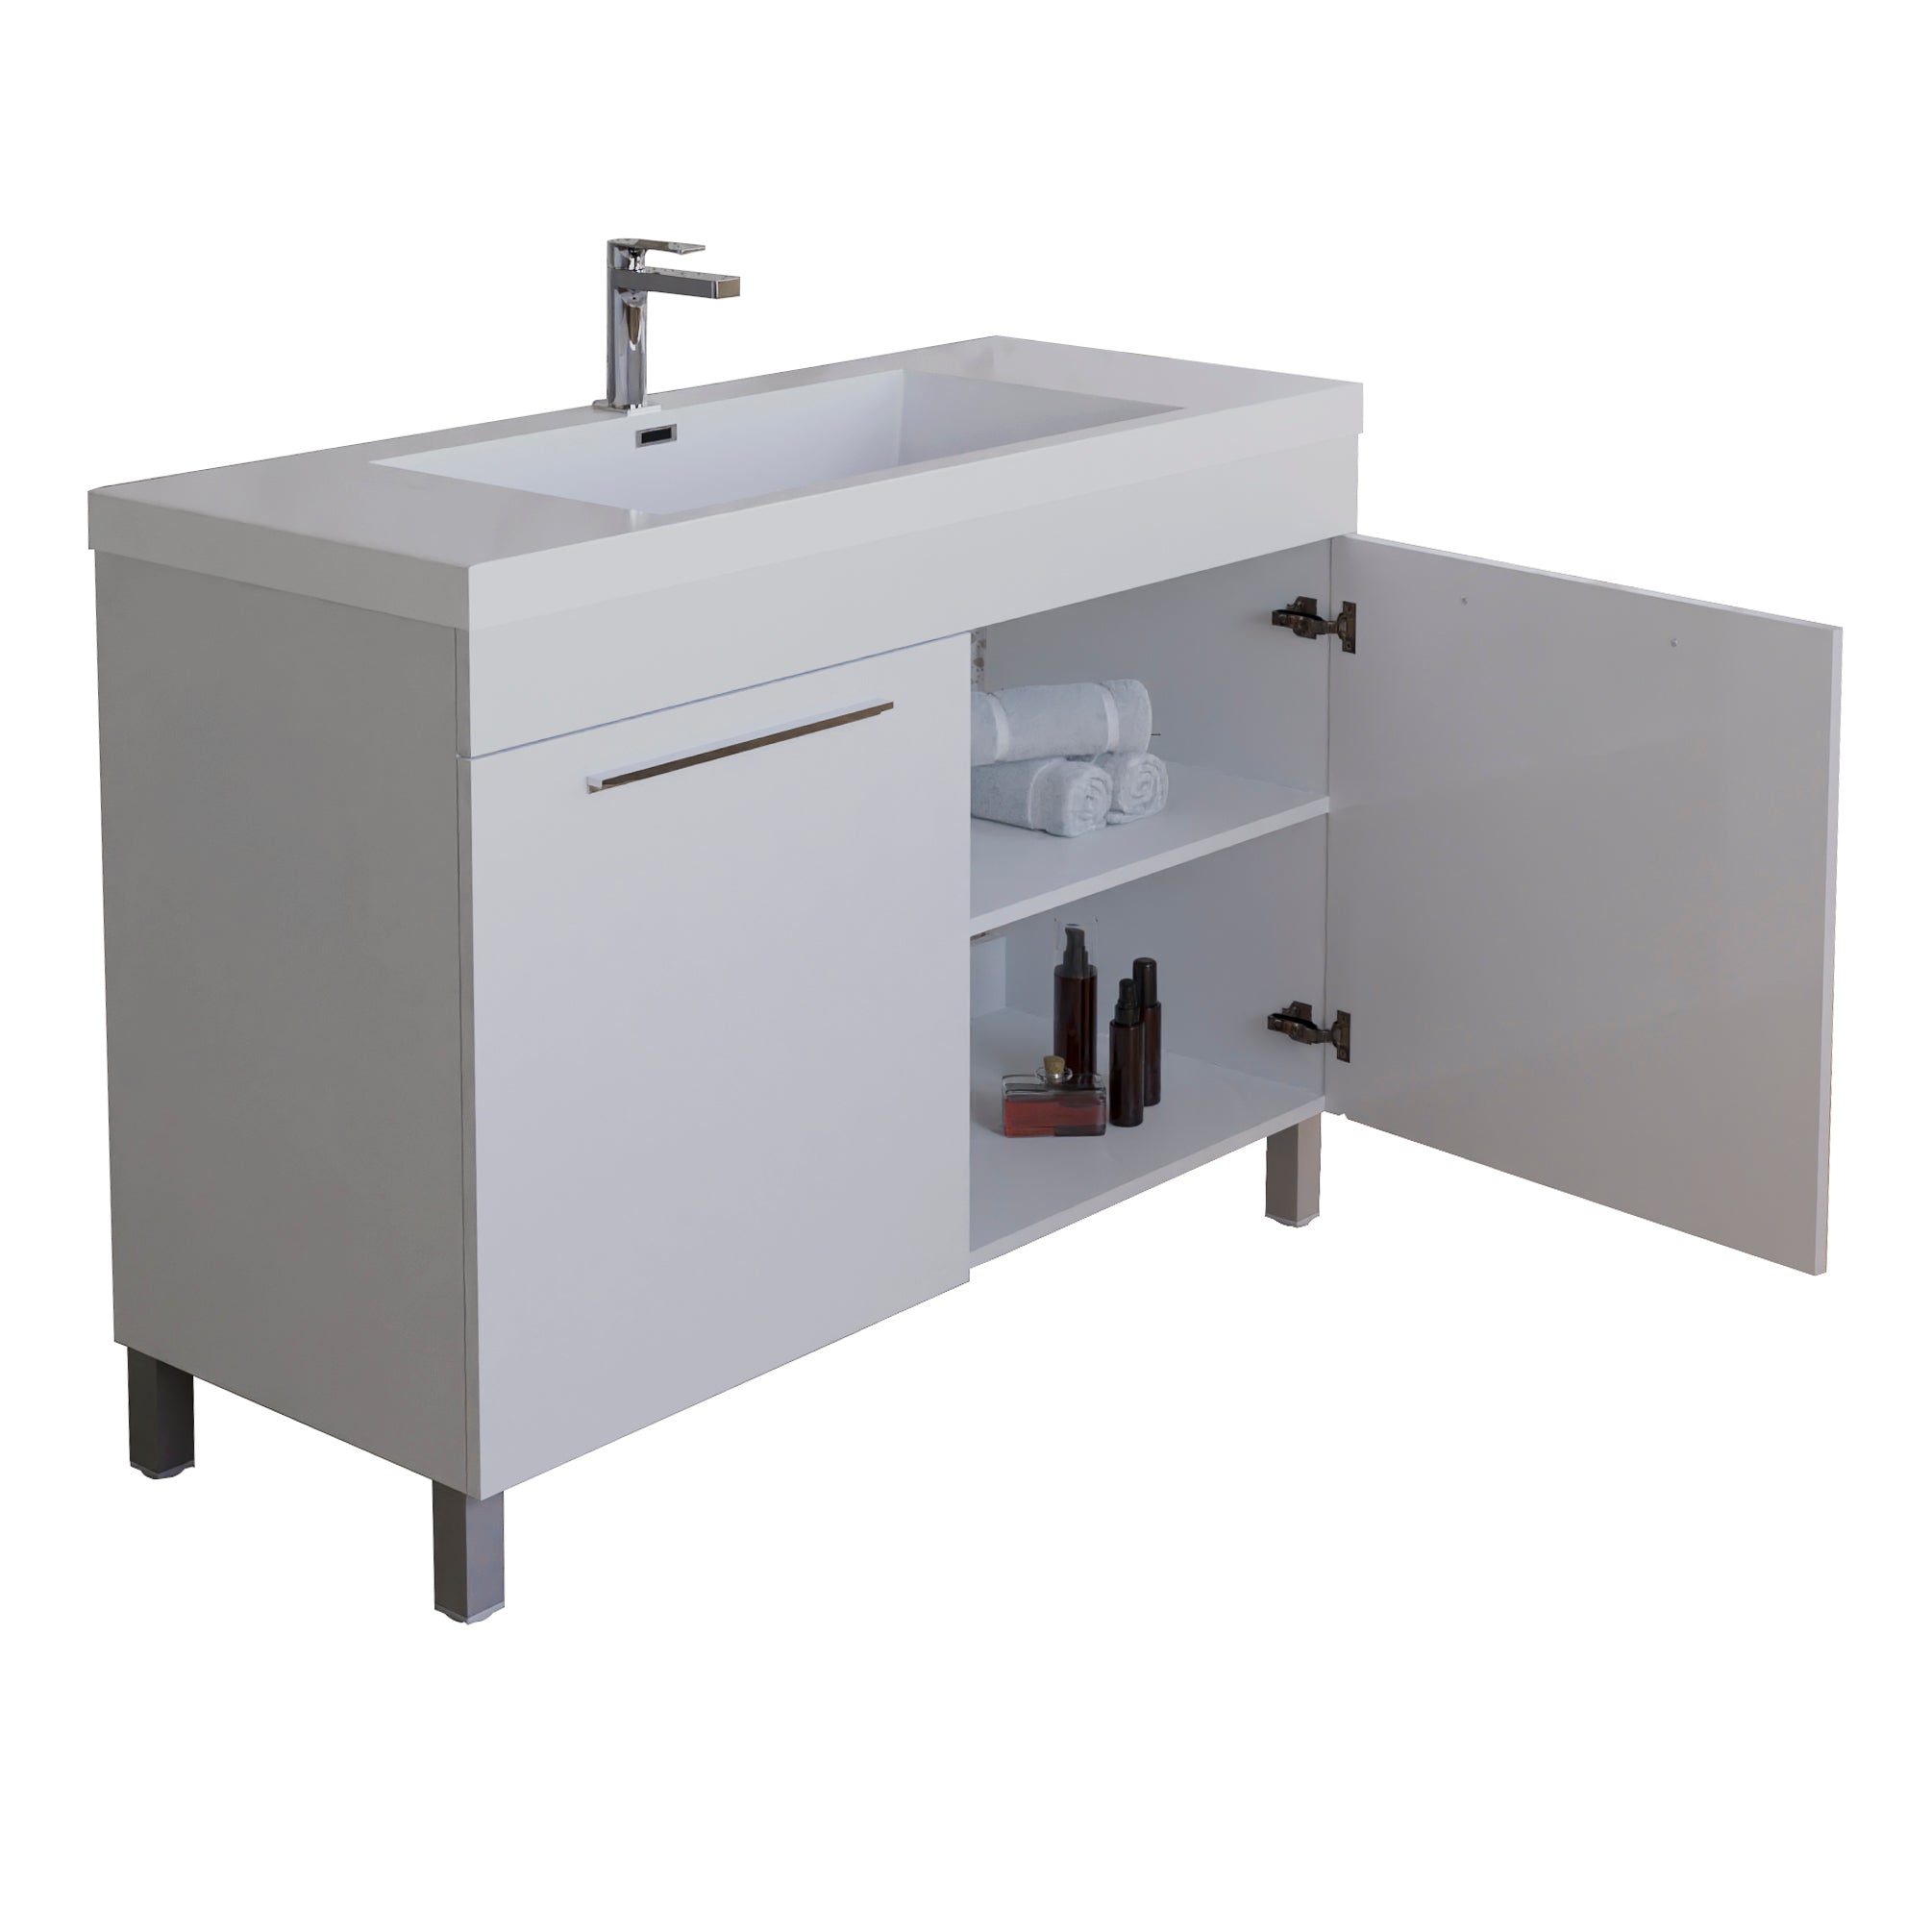 Ocean 39.5 White High Gloss Cabinet, Square Cultured Marble Sink, Free Standing Vanity Set